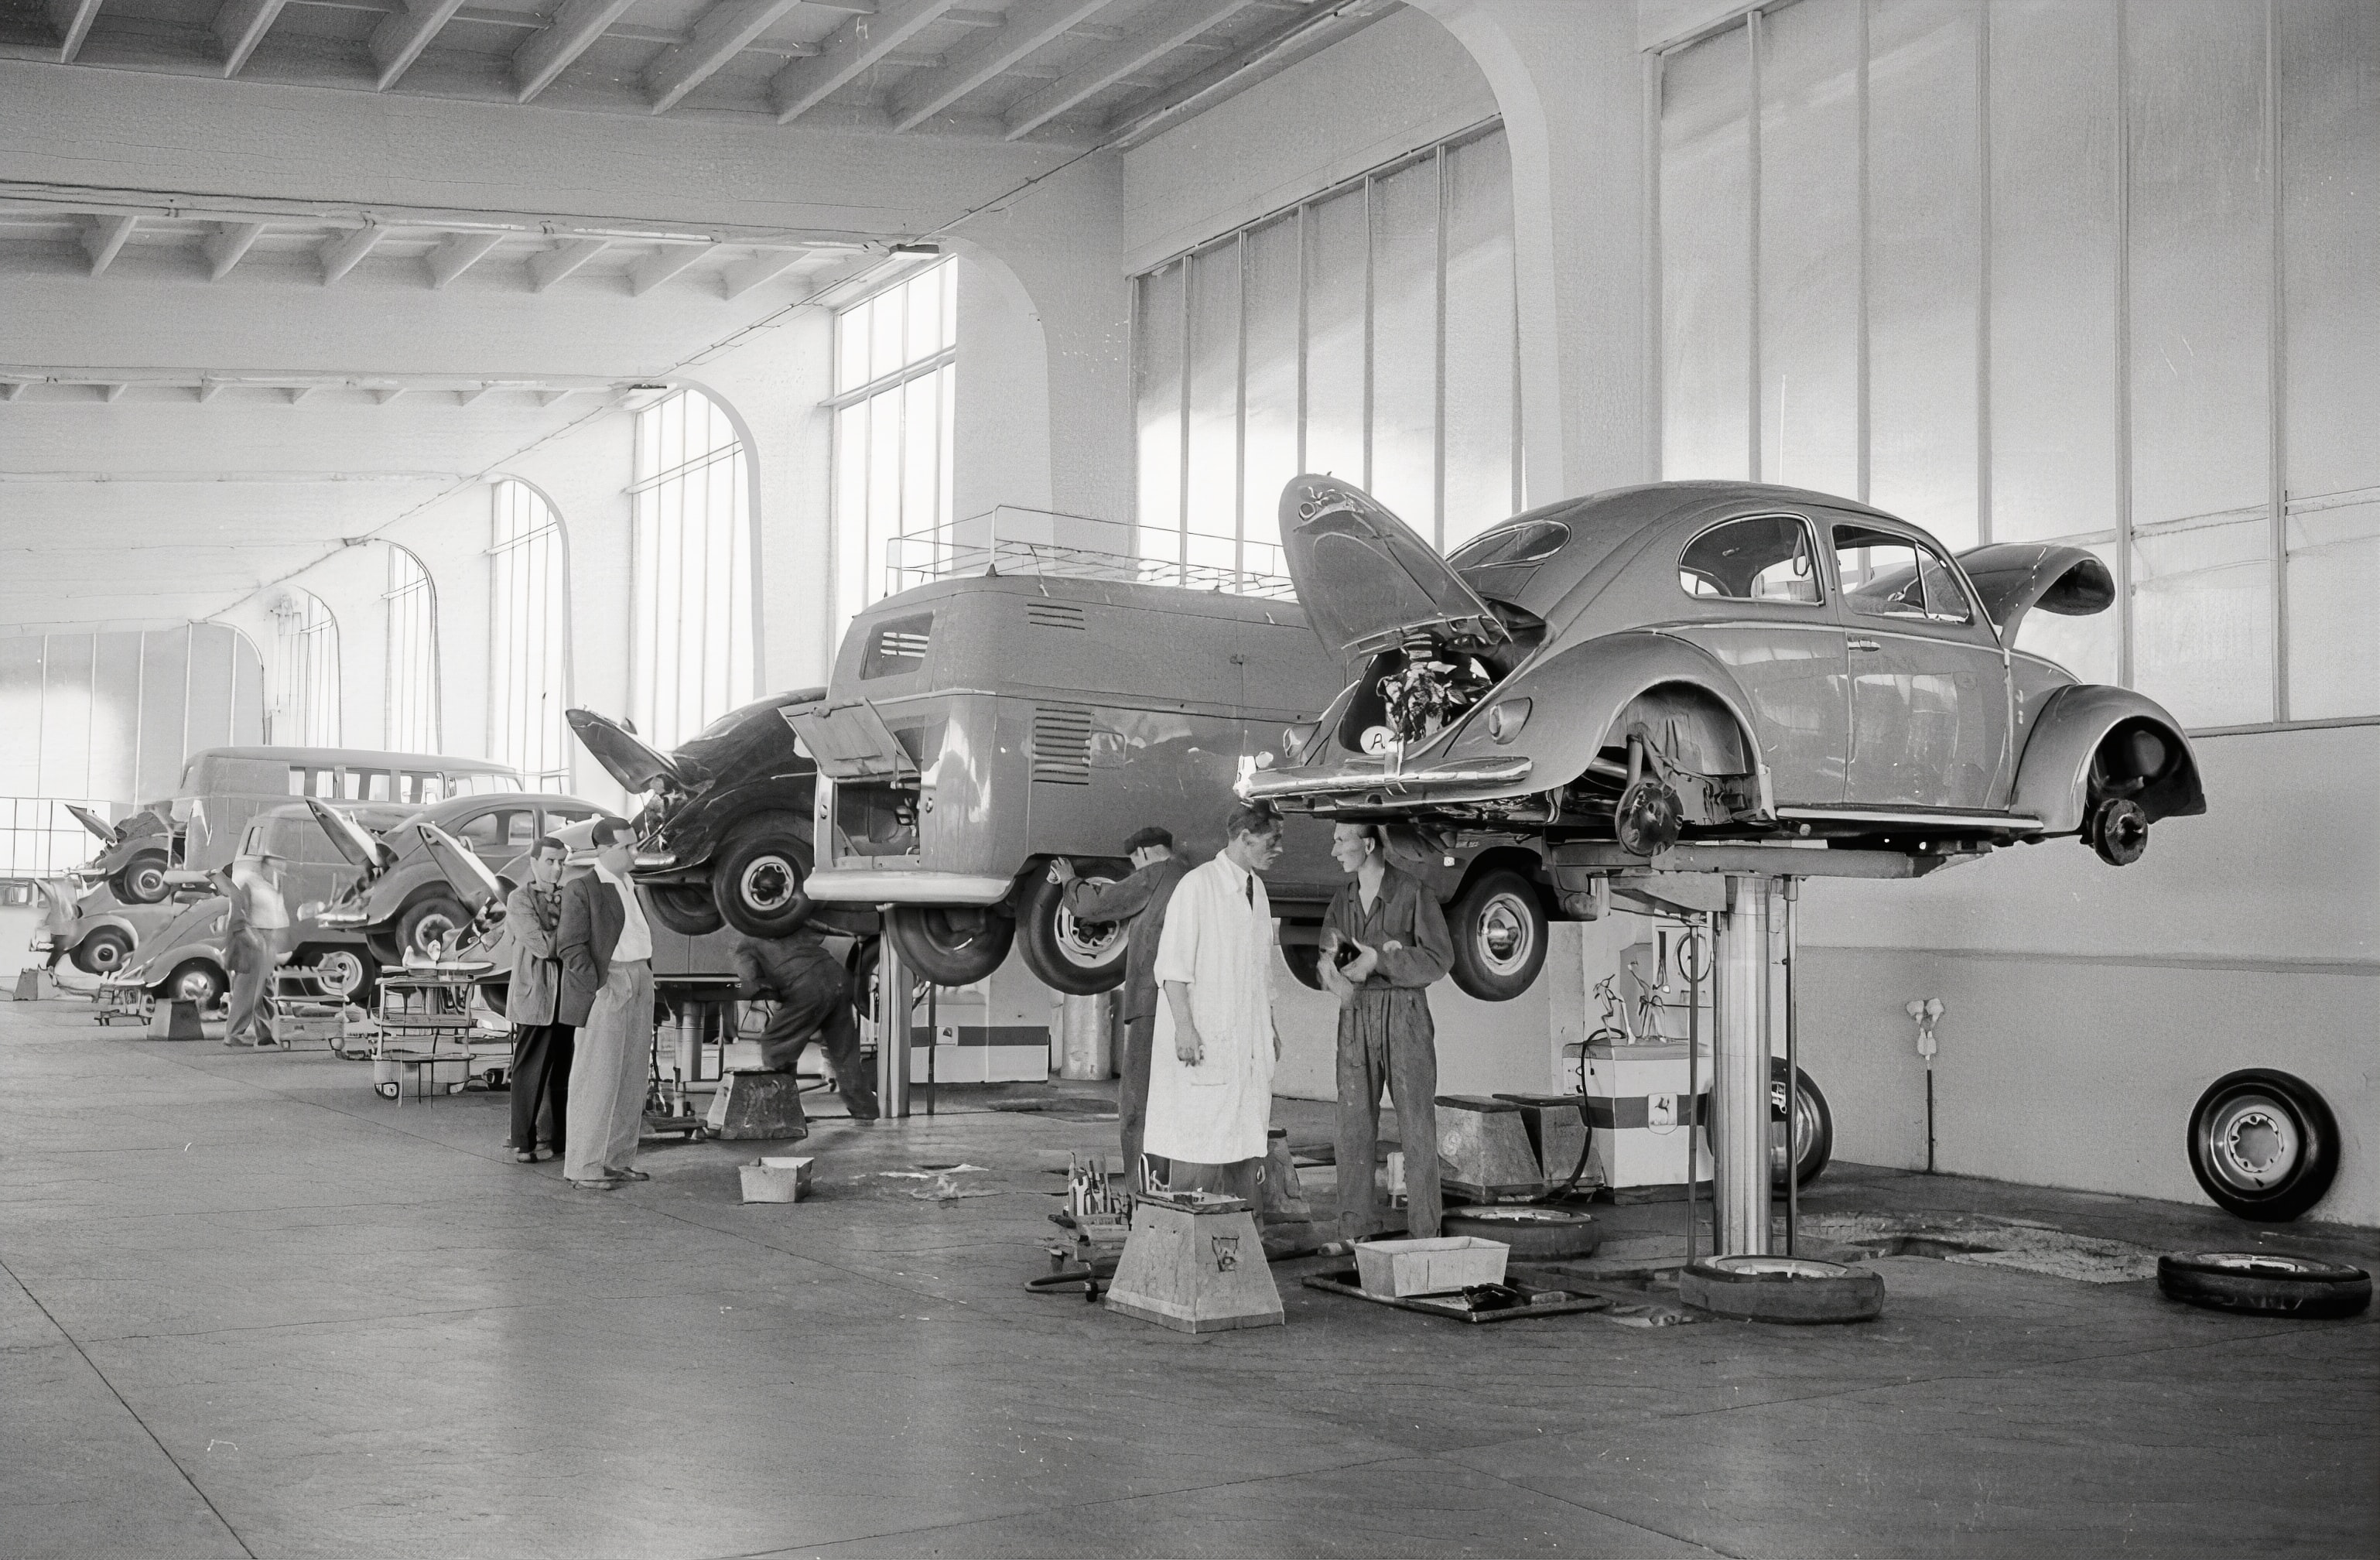 An assembly line of VW bugs